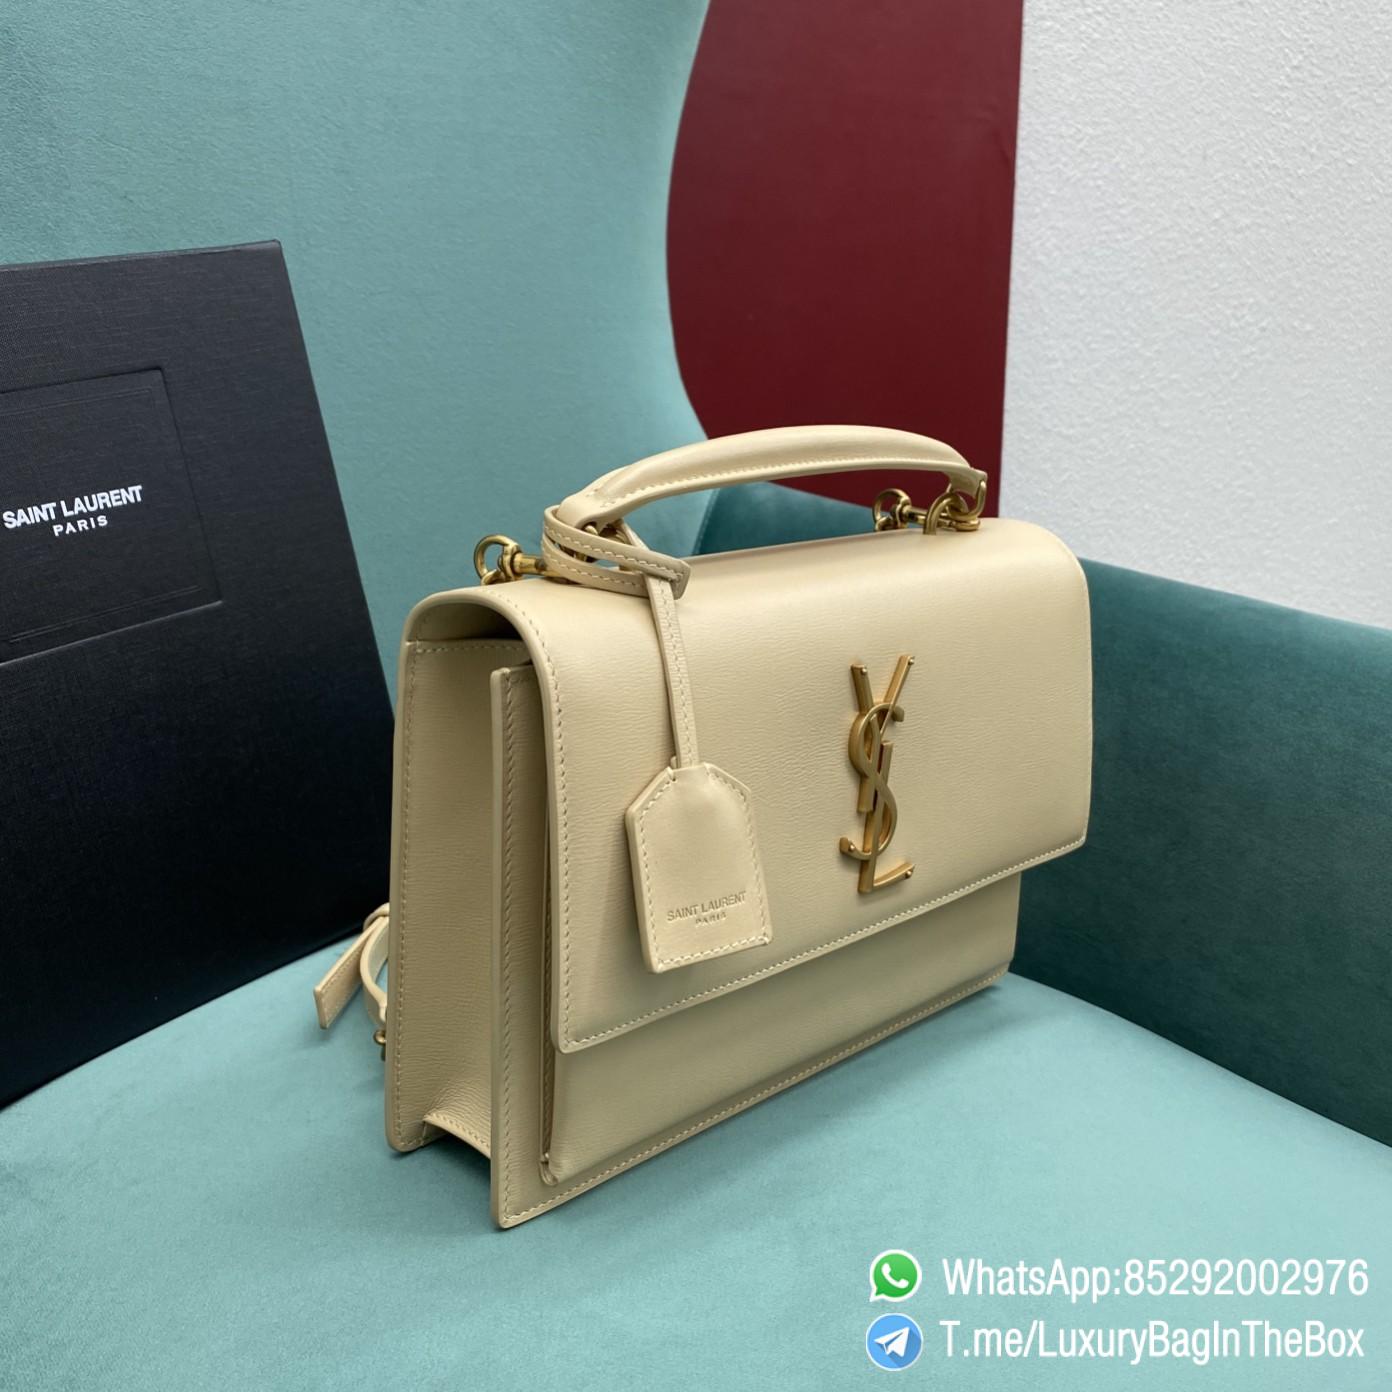 Best Replica YSL Sunset Satchel In Ivory Natural Smooth Leather with Front Flap Top Handle Chain and Leather Shoulder Strap Gold Metal YSL Initials SKU 634723D420W9141 02